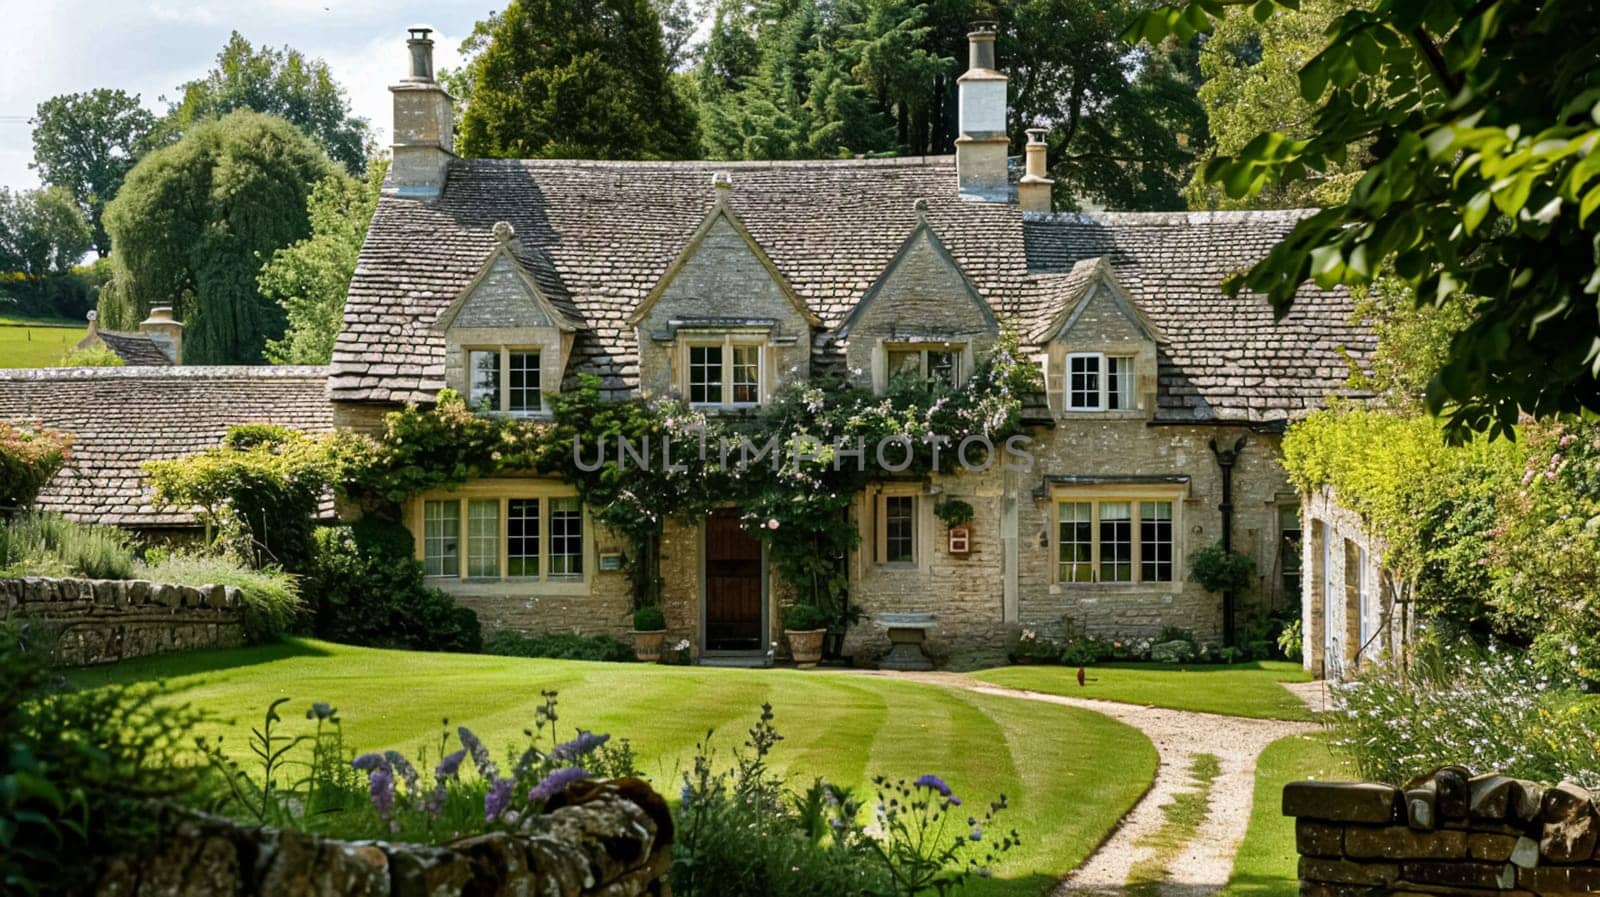 Cotswolds cottage in the English countryside style, modern architecture and design